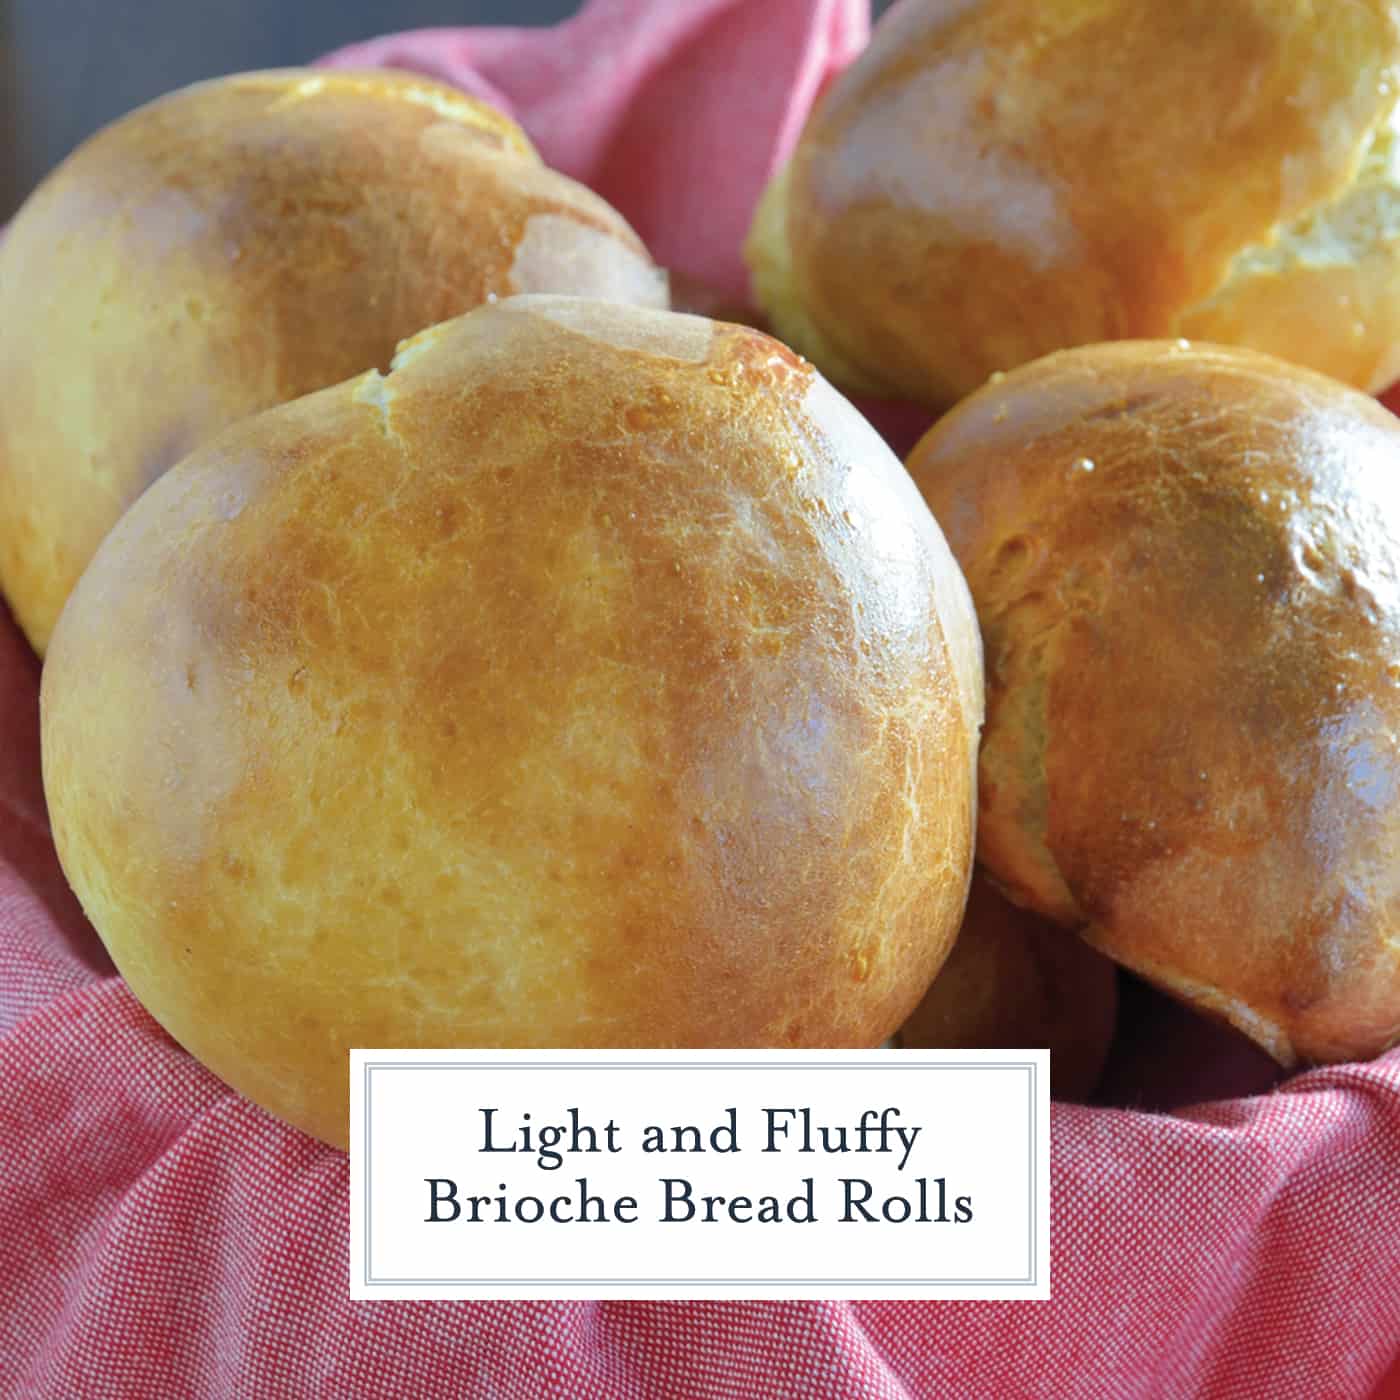 This Brioche Bread Rolls recipe shows you that making bread at home isn’t as hard as you think! Step-by-step instructions on how to make brioche right here! #briocheroll #whatisbrioche #Howtomakebrioche www.savoryexperiments.com